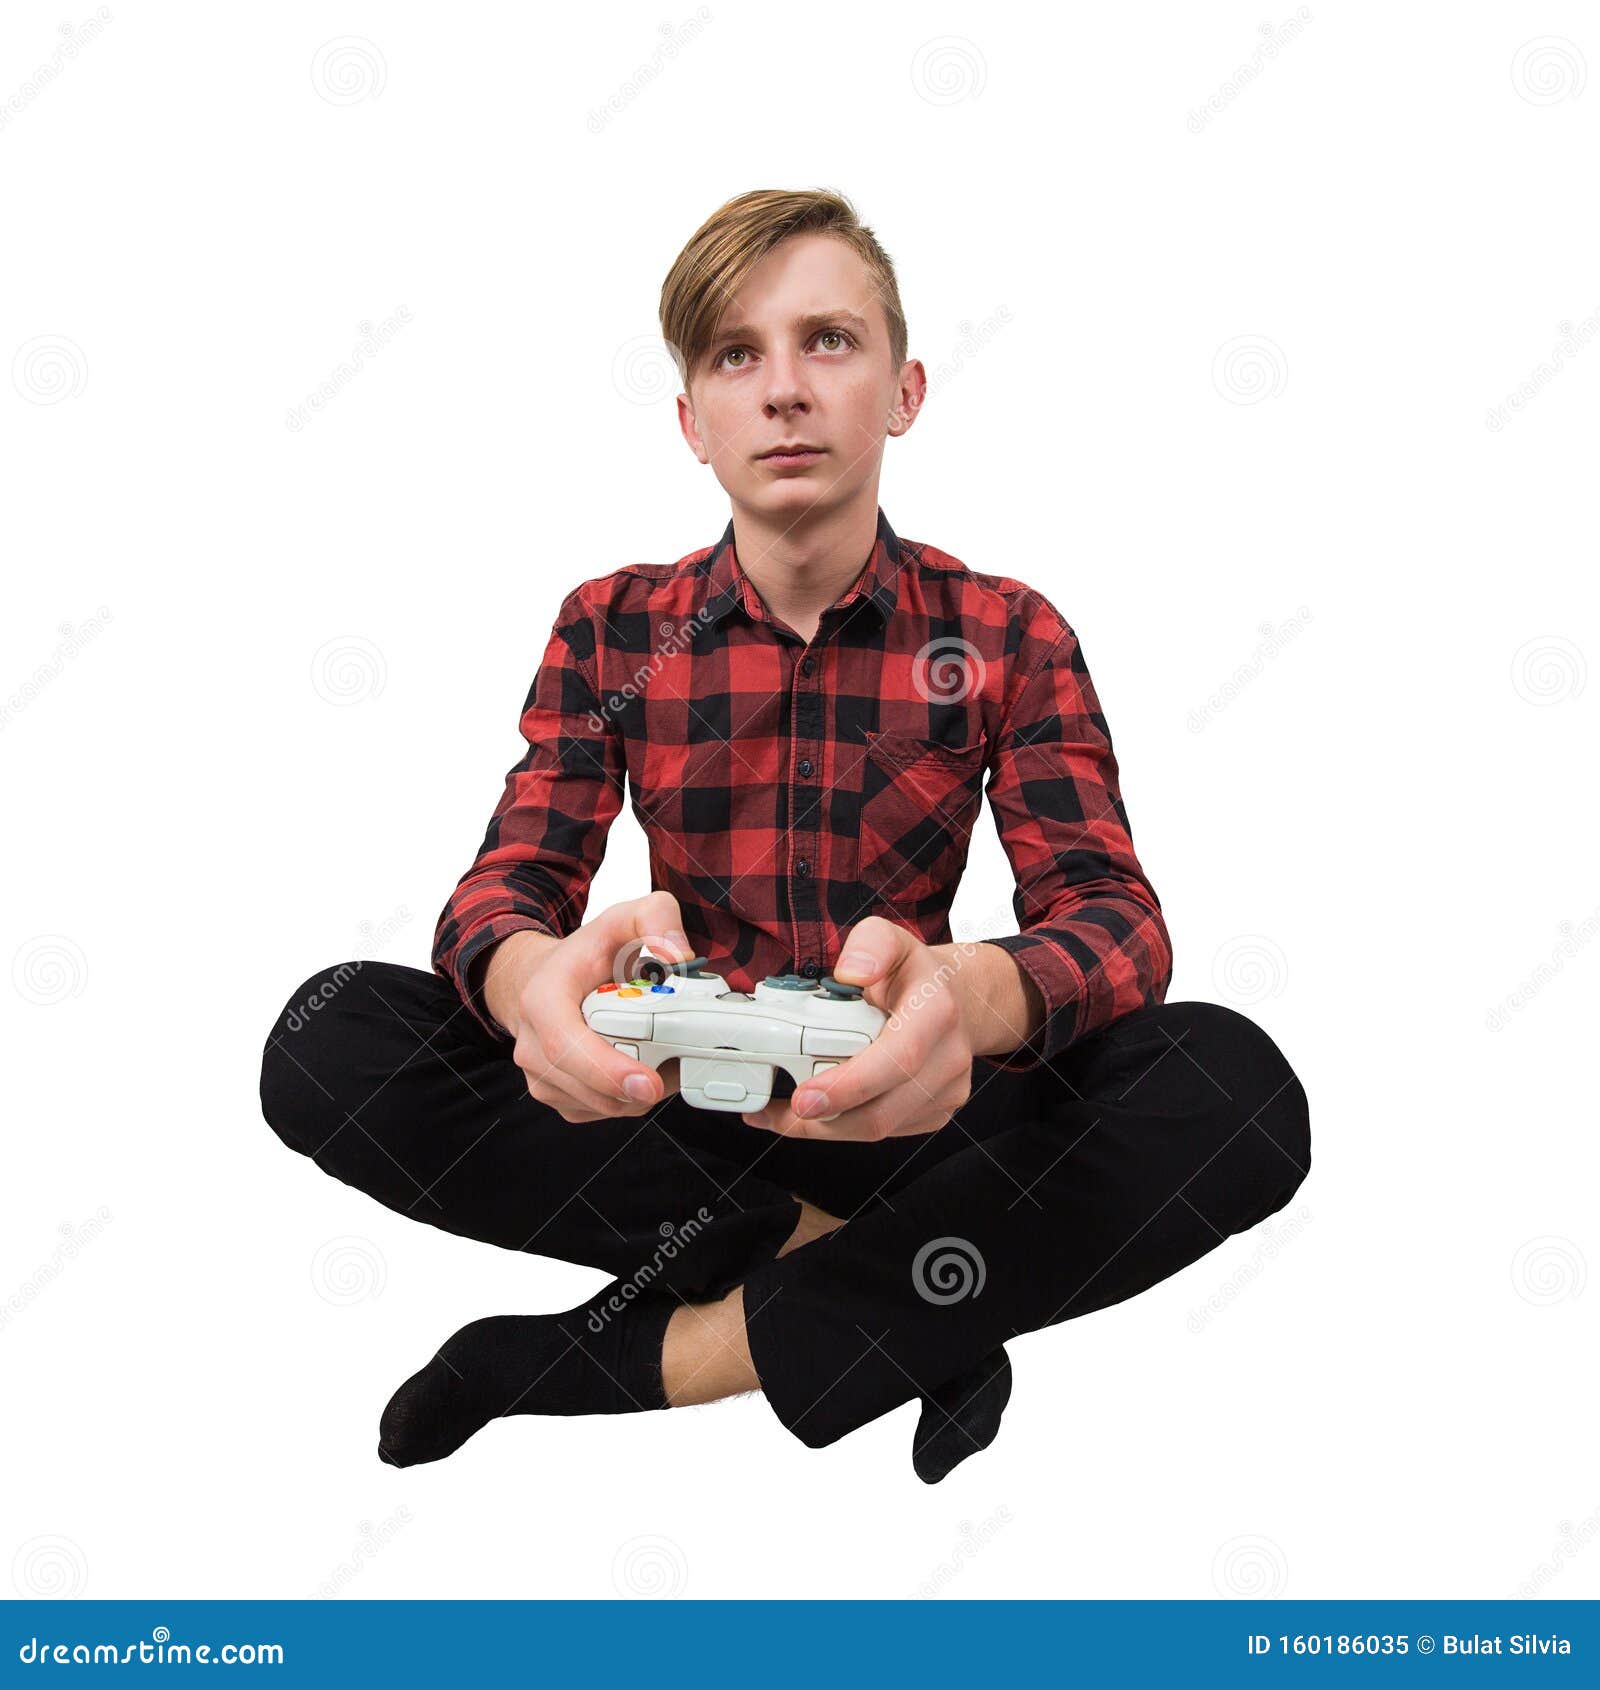 serious intent teen guy seated on the floor playing video games  over white background. boy stand all ears holding